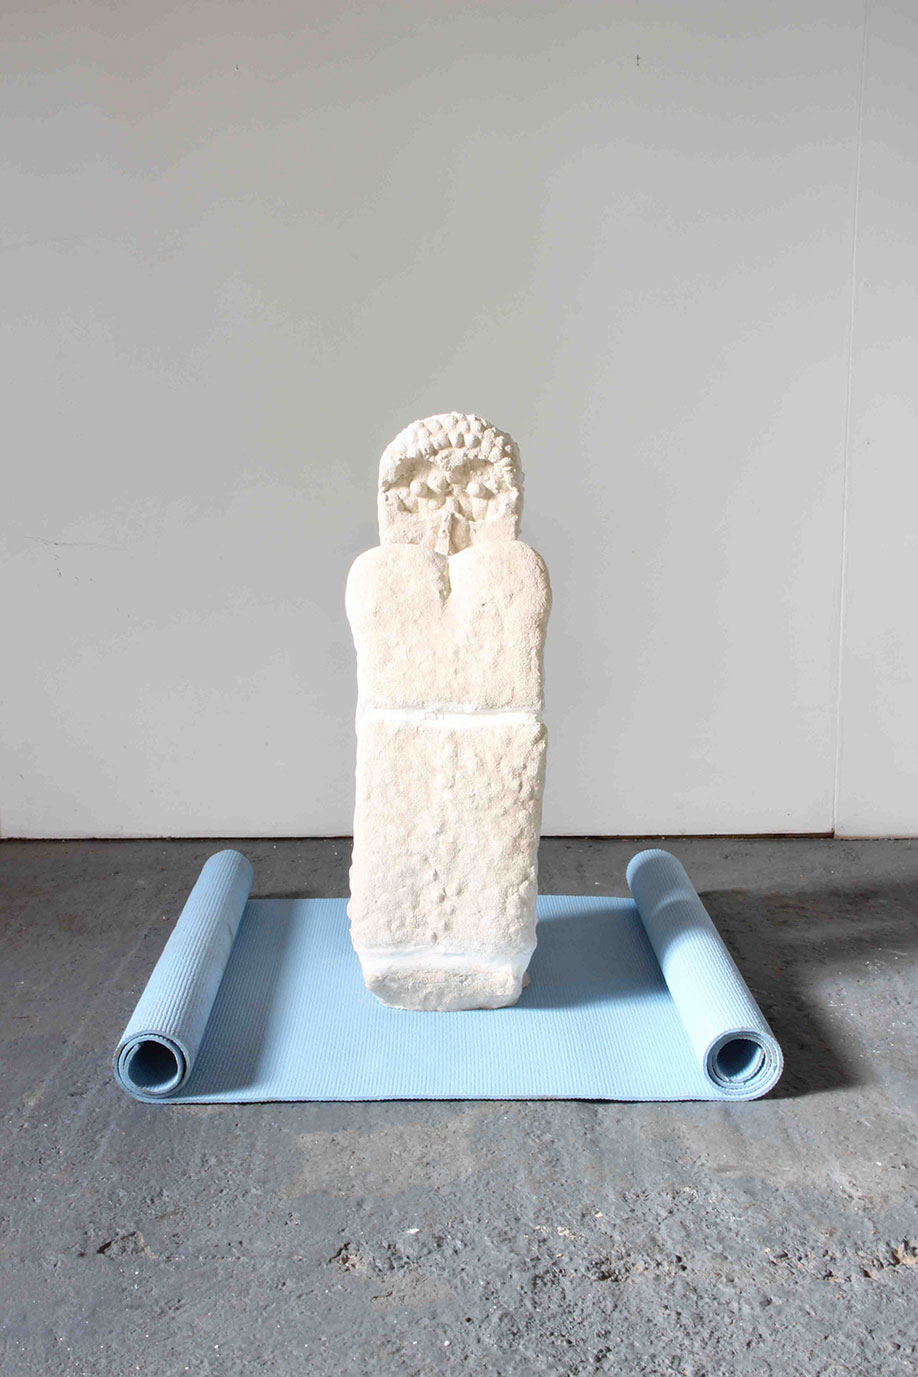 <b>Title: </b>O.I.<br /><b>Year: </b>2015<br /><b>Medium: </b>Plaster, sand, and rubber matting<br /><b>Size: </b>80 x 30 x 27 cm